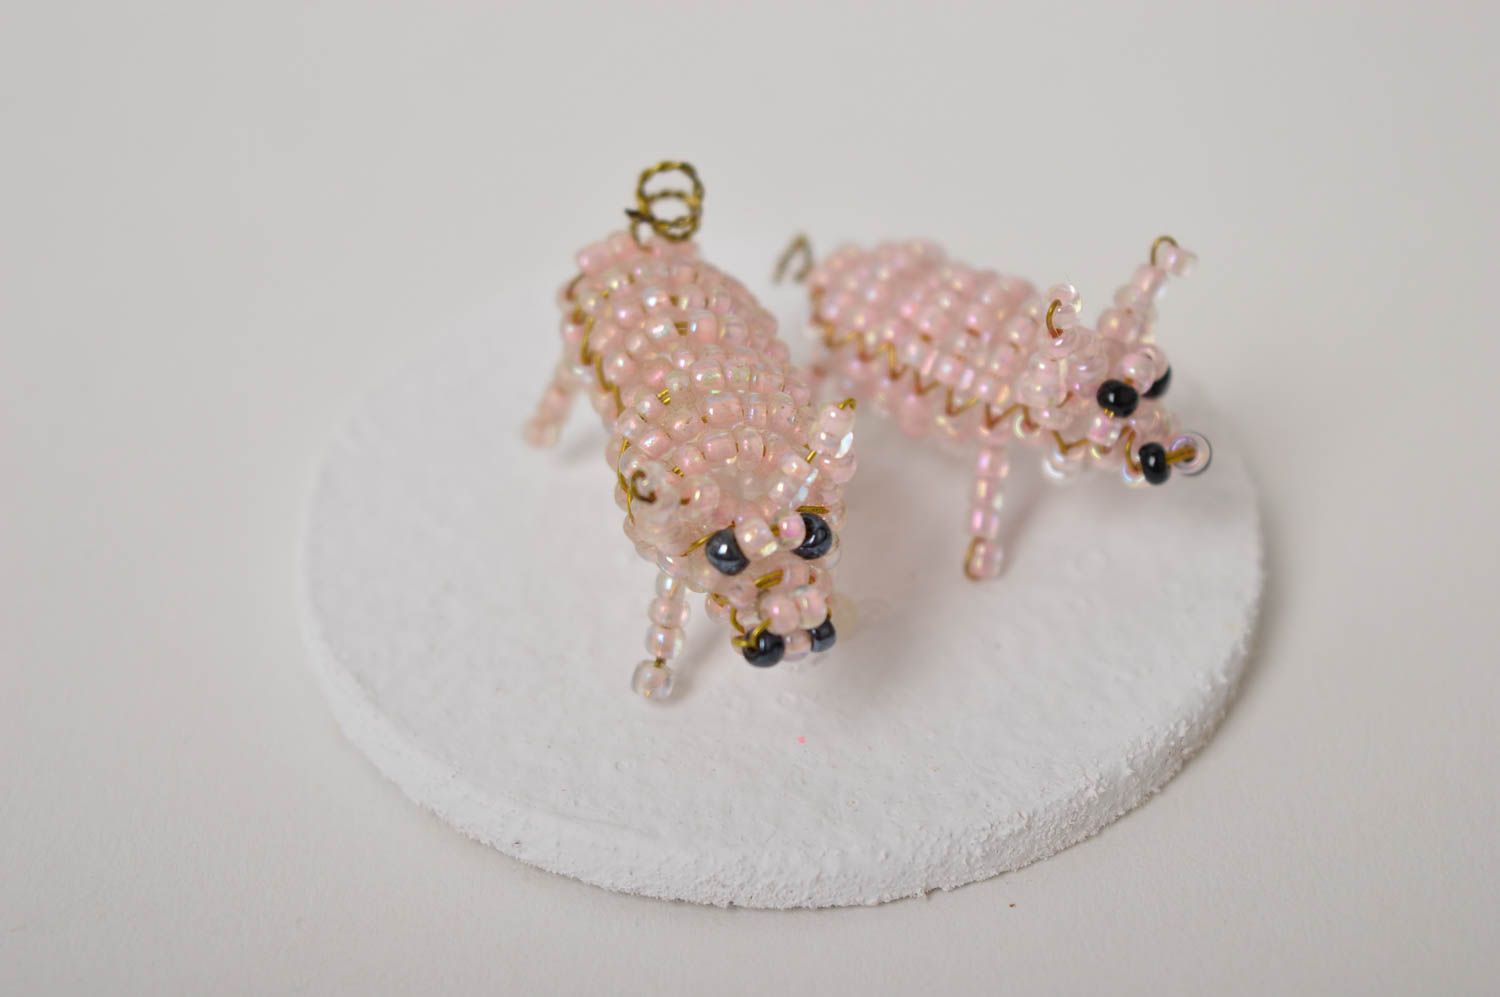 Handmade collectible figurines beaded animal figurines unique gifts kids gifts photo 2